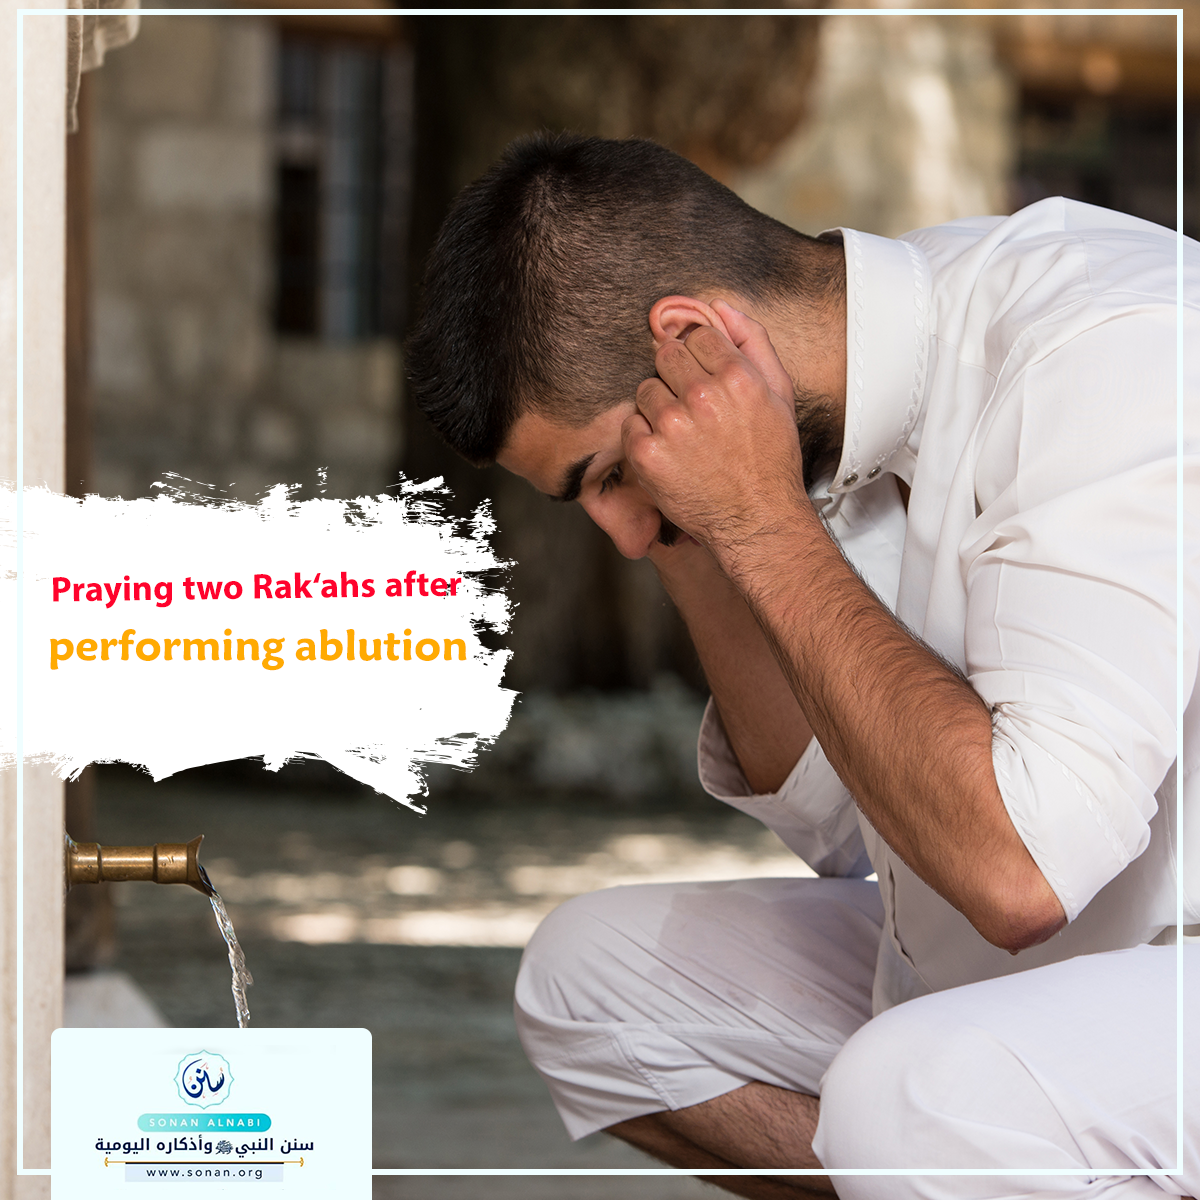 	Praying two Rak‘ahs after performing ablution